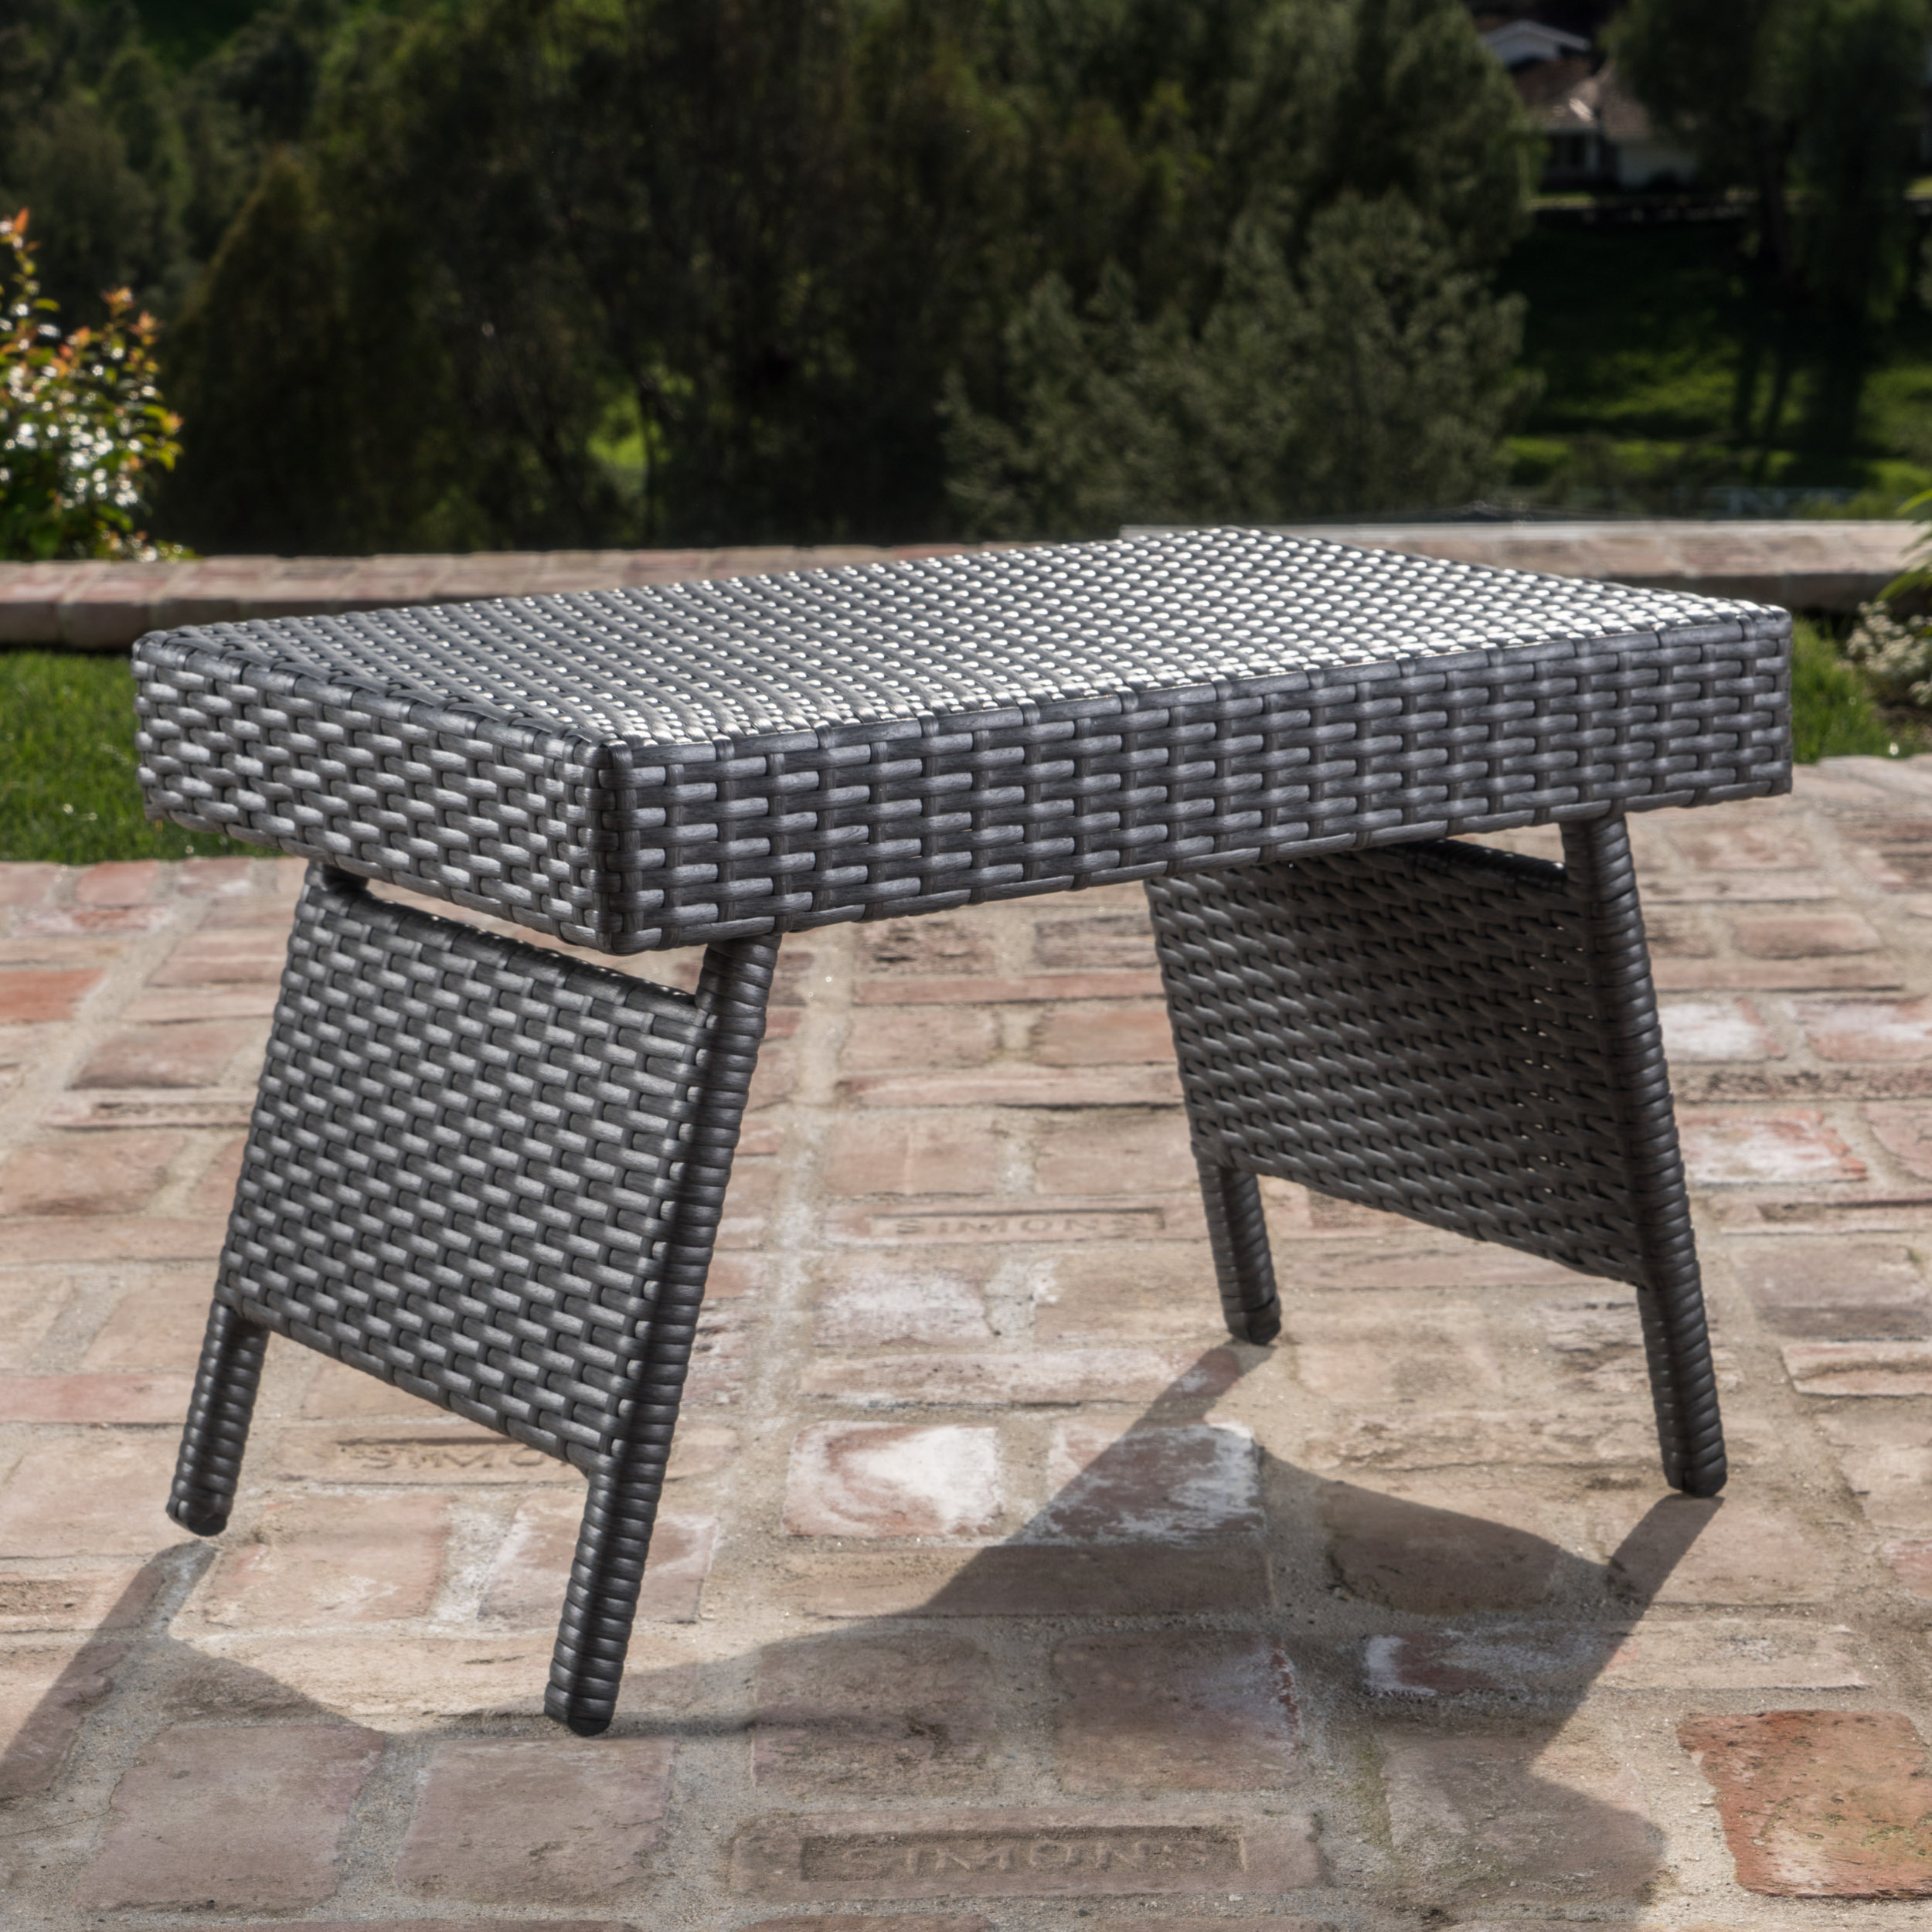 Anthony 3 Piece Outdoor Wicker Lounge with Cushions and Coffee Table, Grey, Green and White Stripe - image 3 of 6